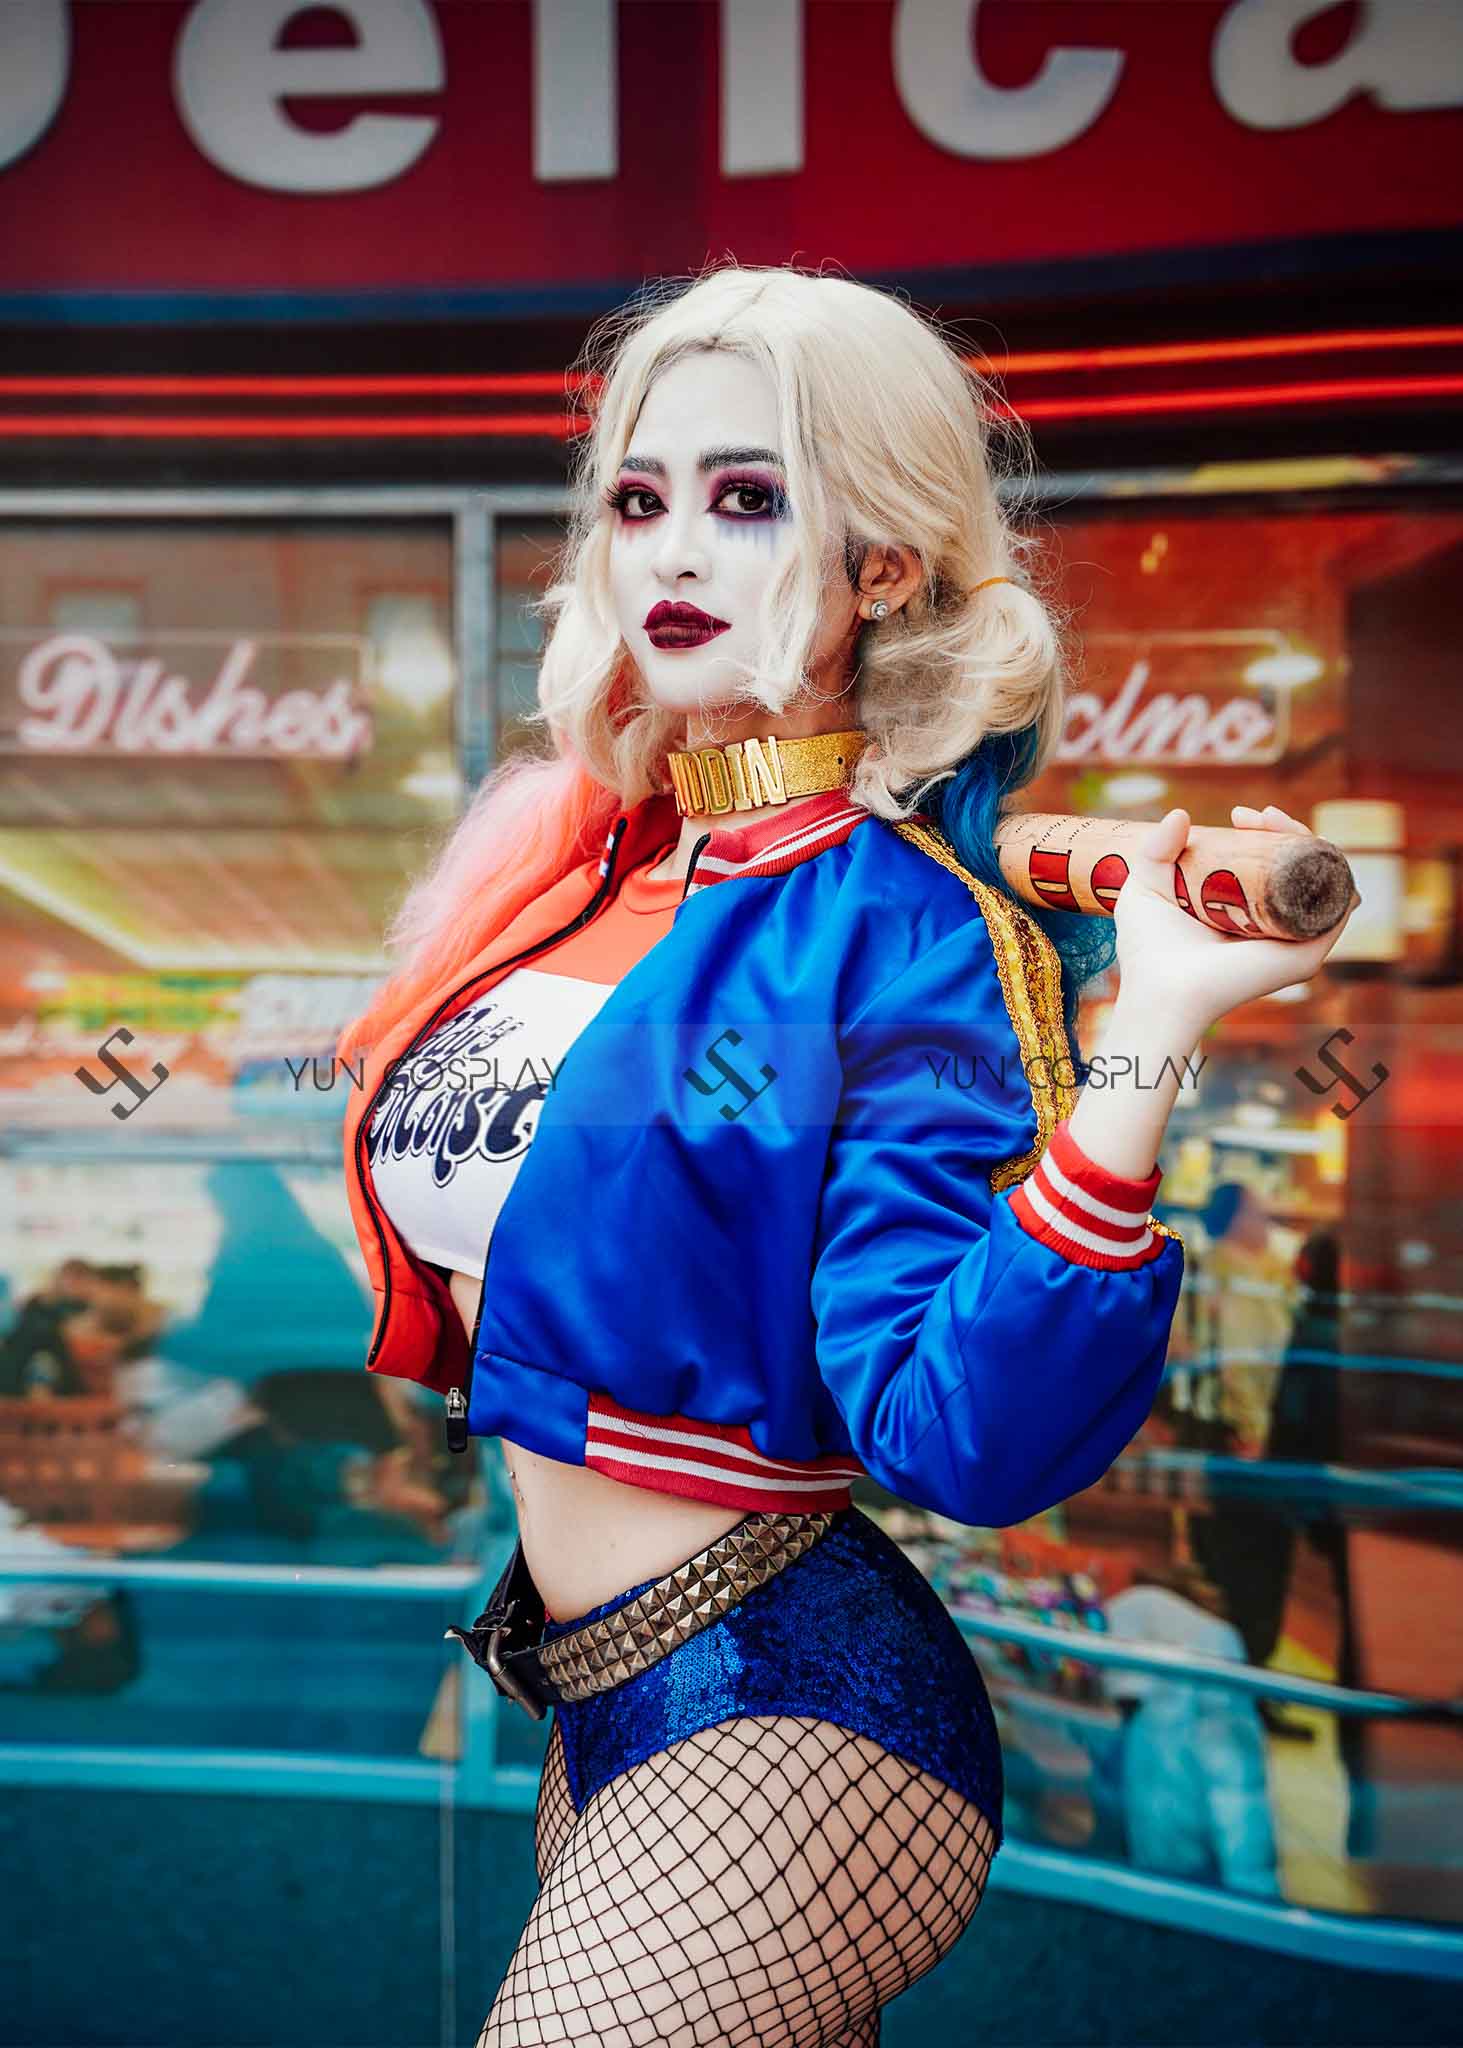 harley-quinn-suicide-squad-2016-3